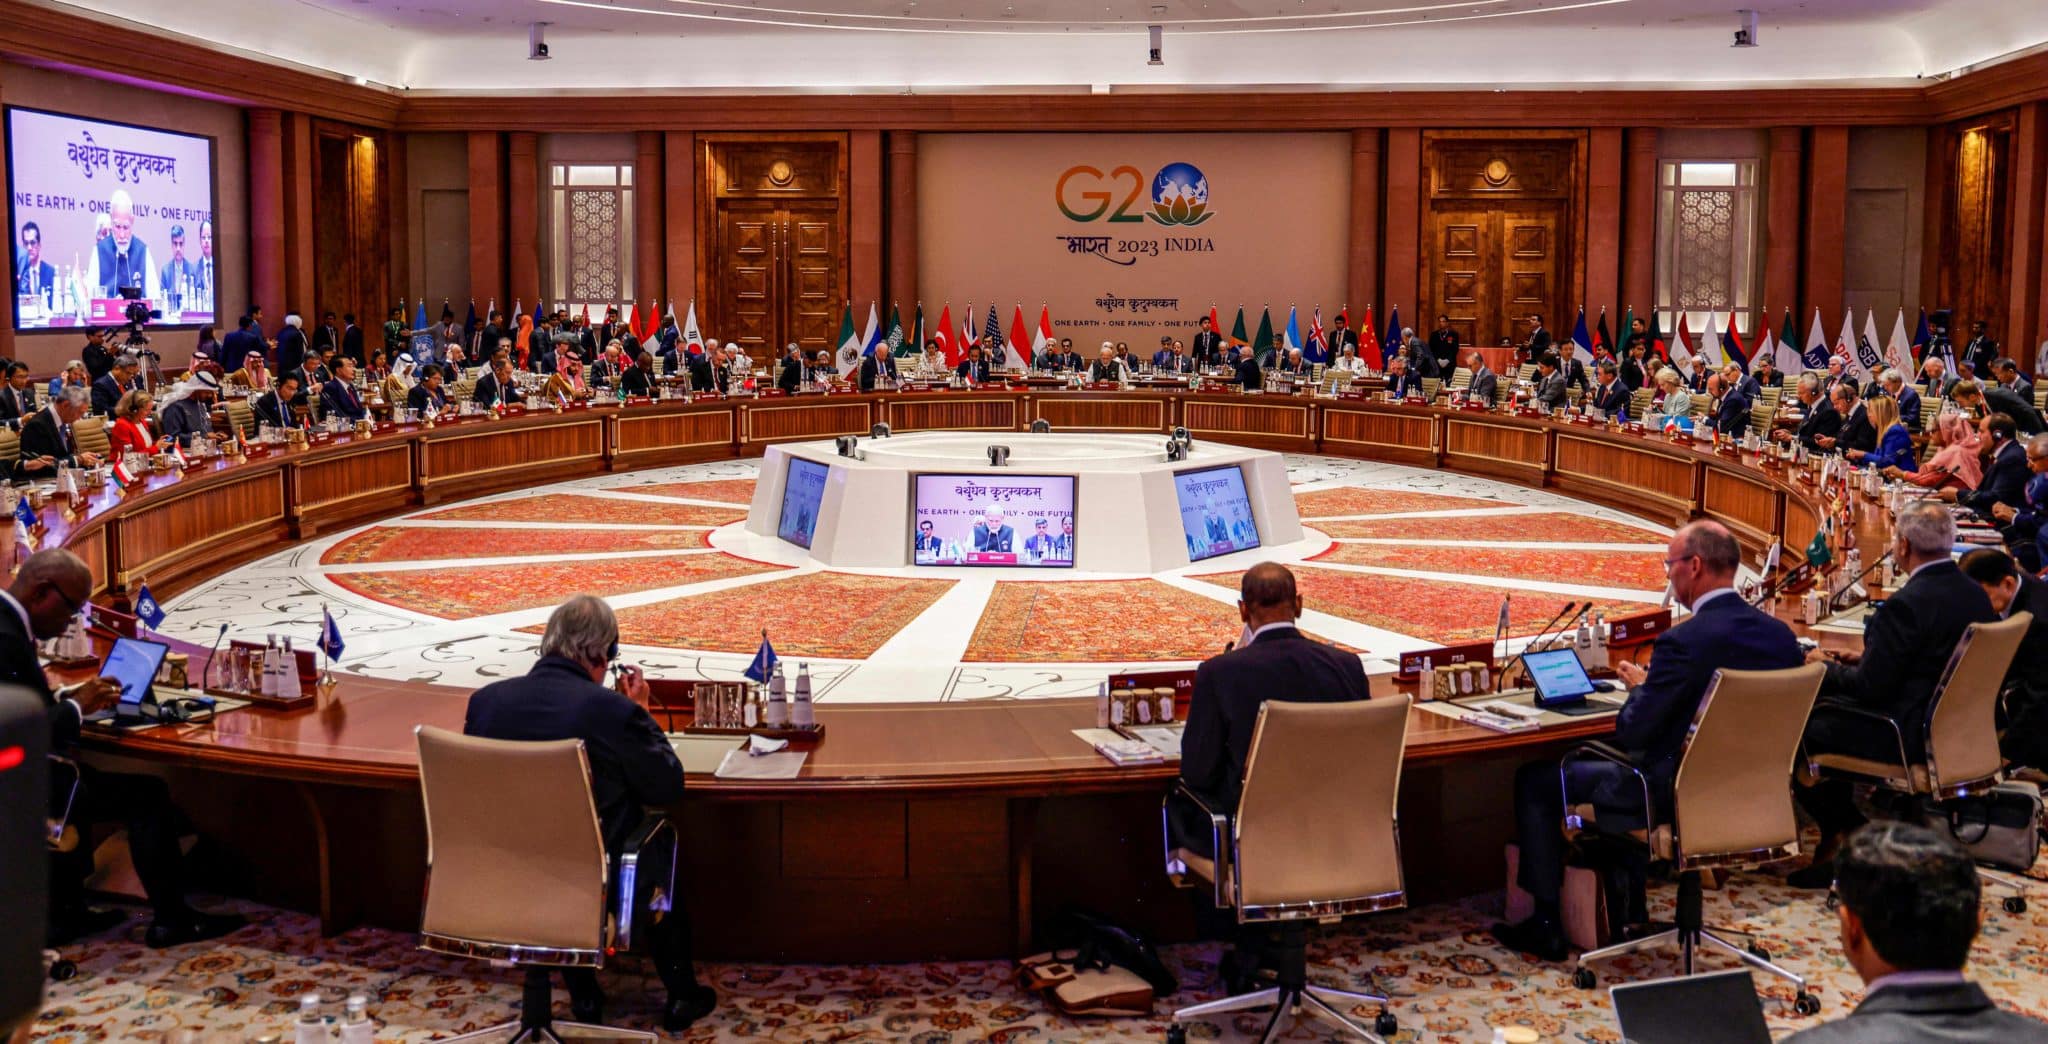 G20 welcomes African Union as permanent member at Delhi summit